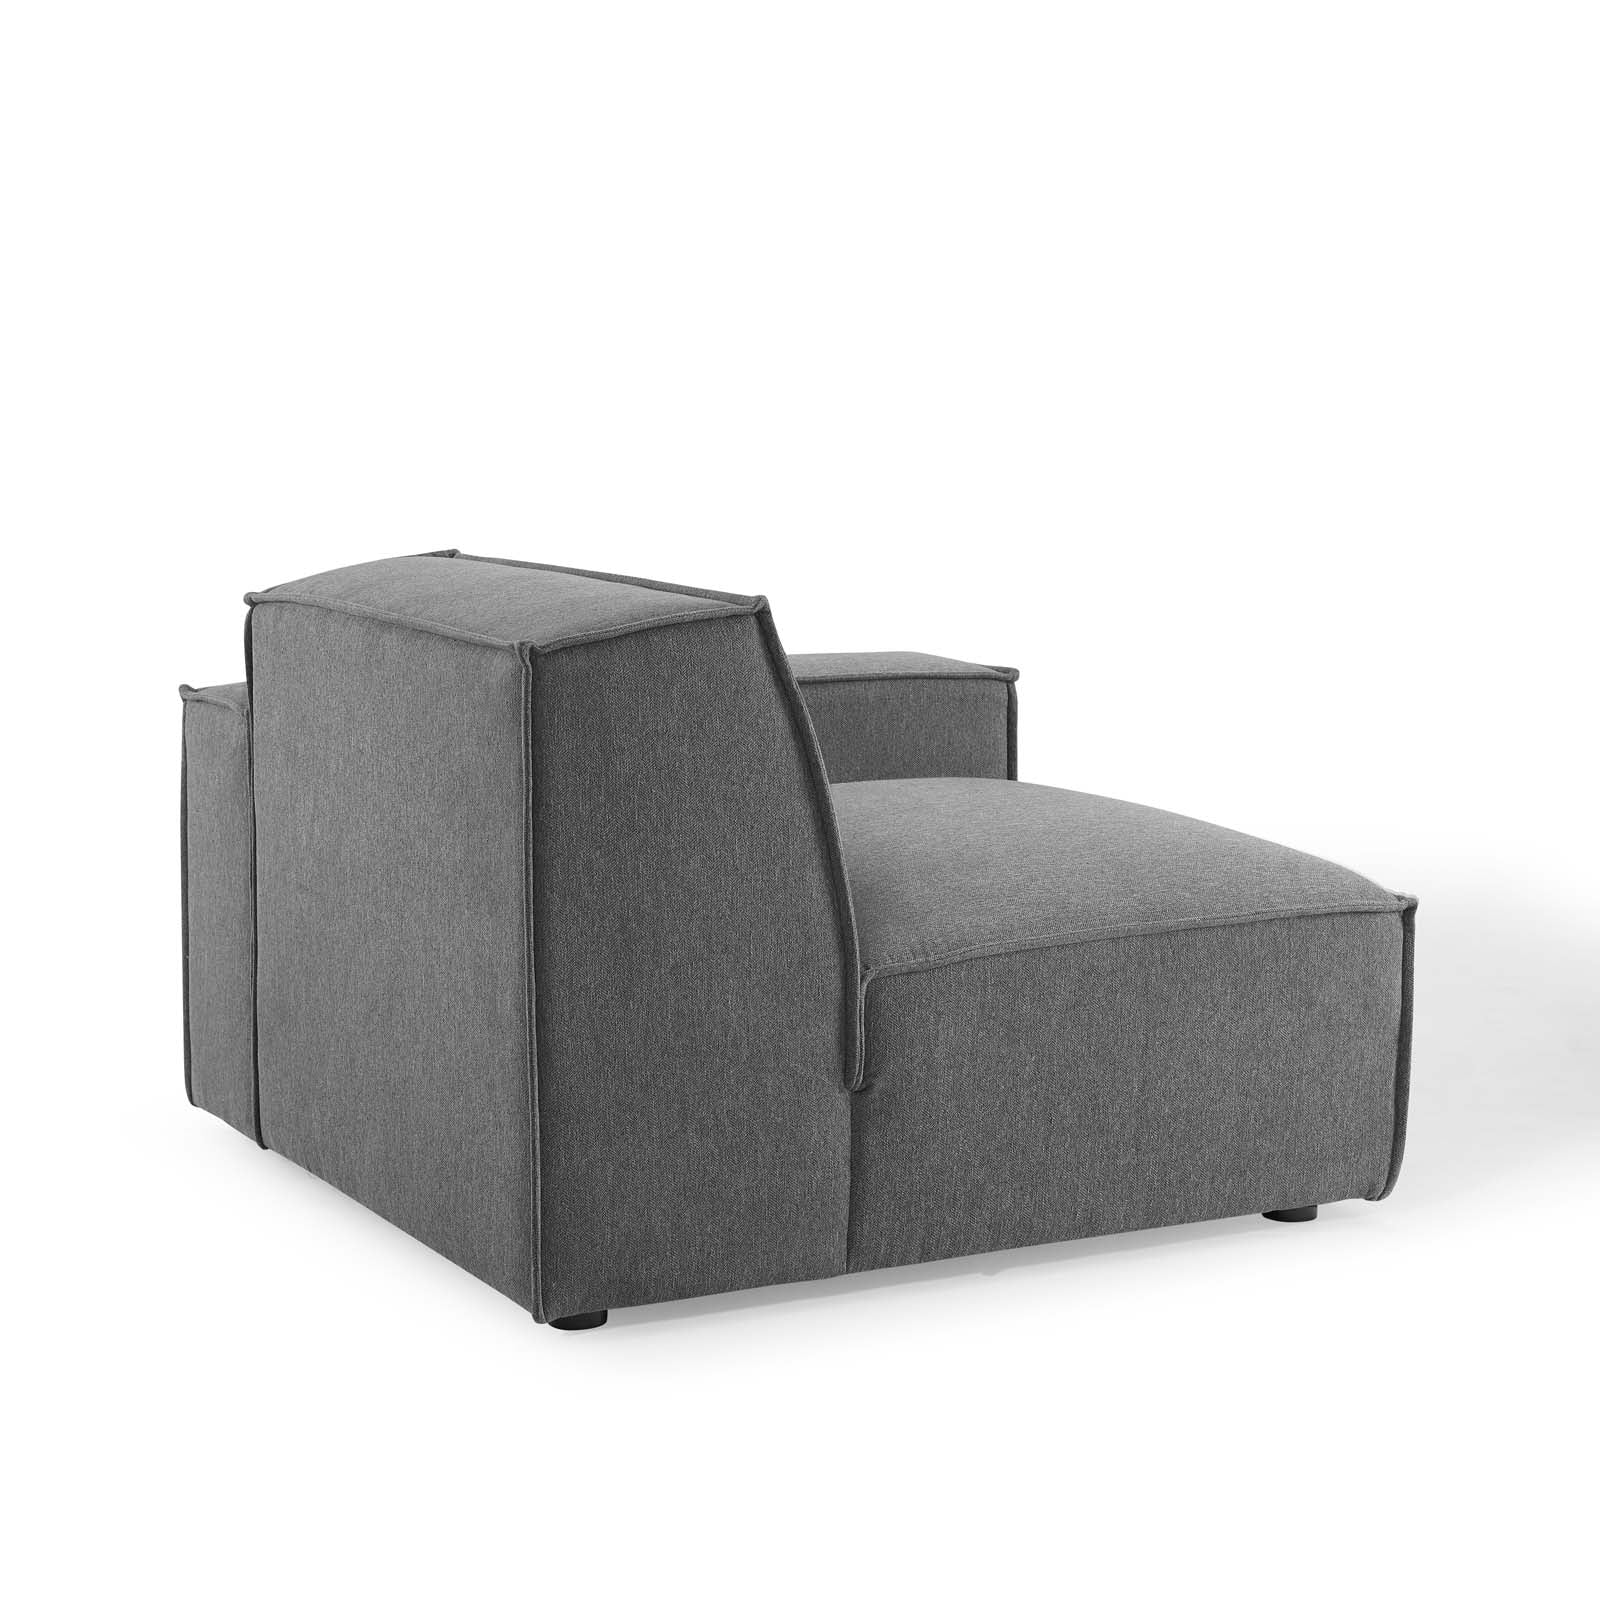 Restore 4-Piece Sectional Sofa - East Shore Modern Home Furnishings